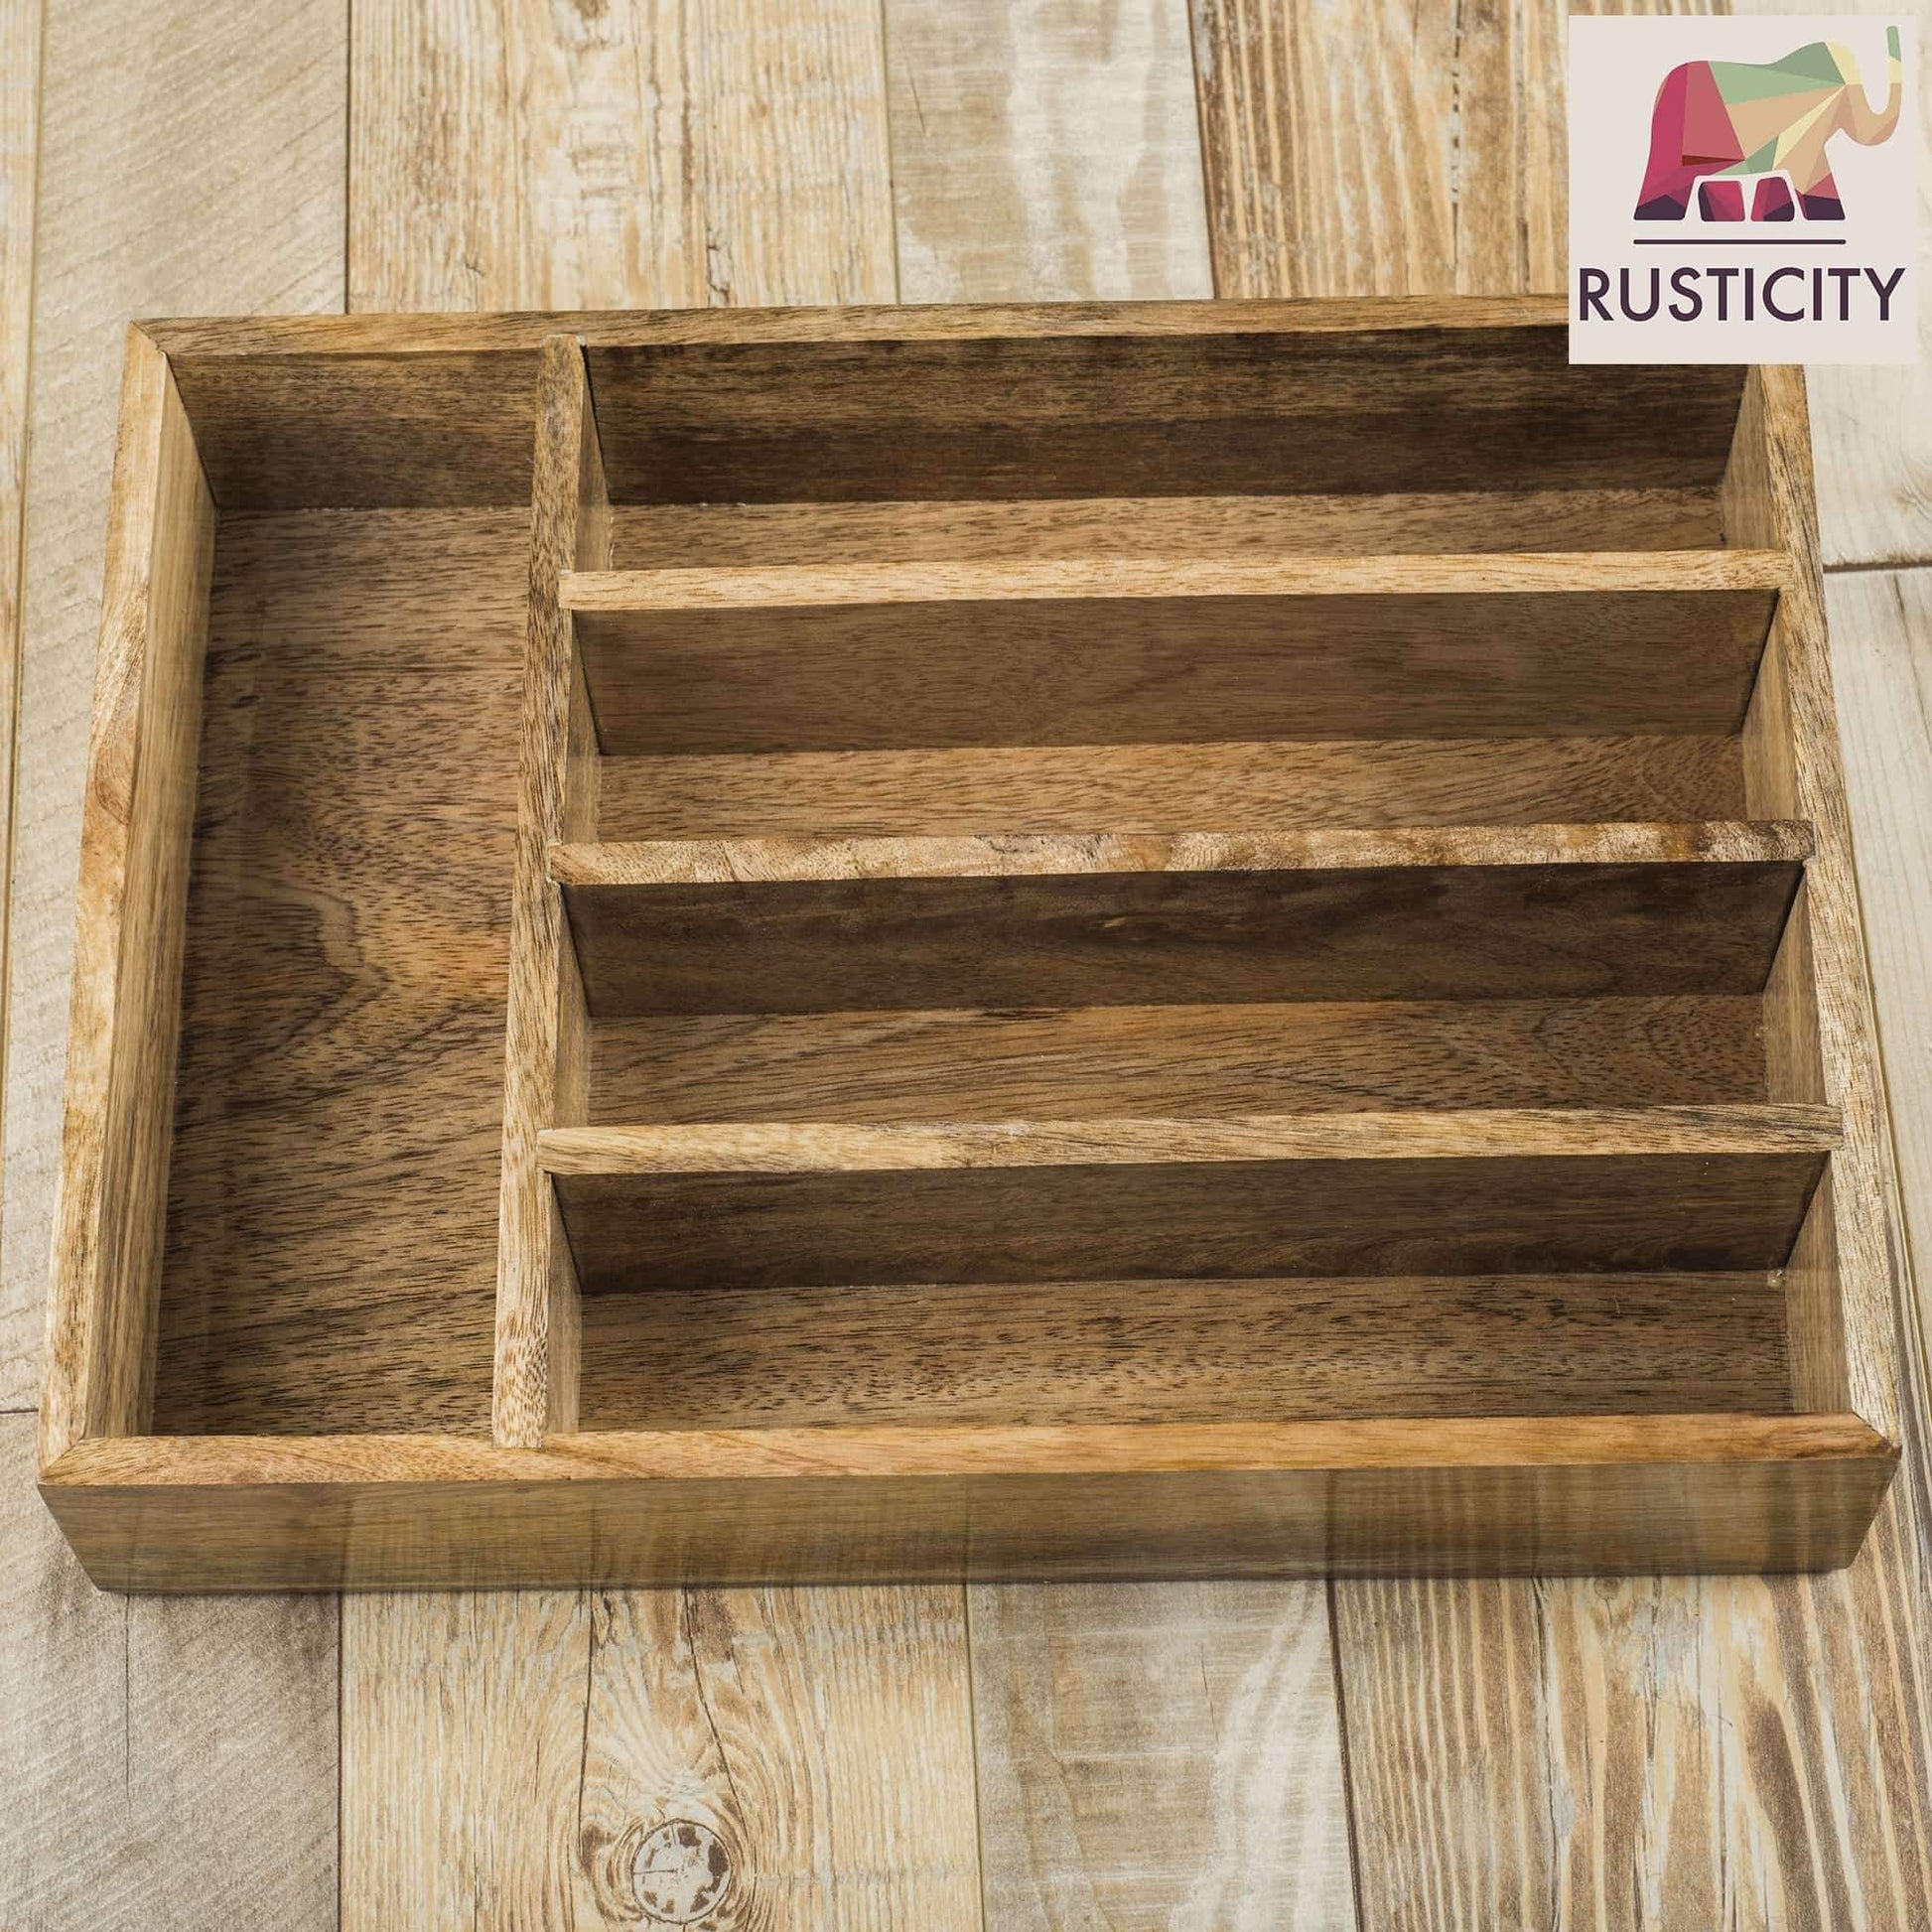 Save on rusticity wooden utensil drawer organizer with 5 compartments kitchen flatware cutlery tray organizer mango wood handmade 13 7 x 10 2 x 2 6 in